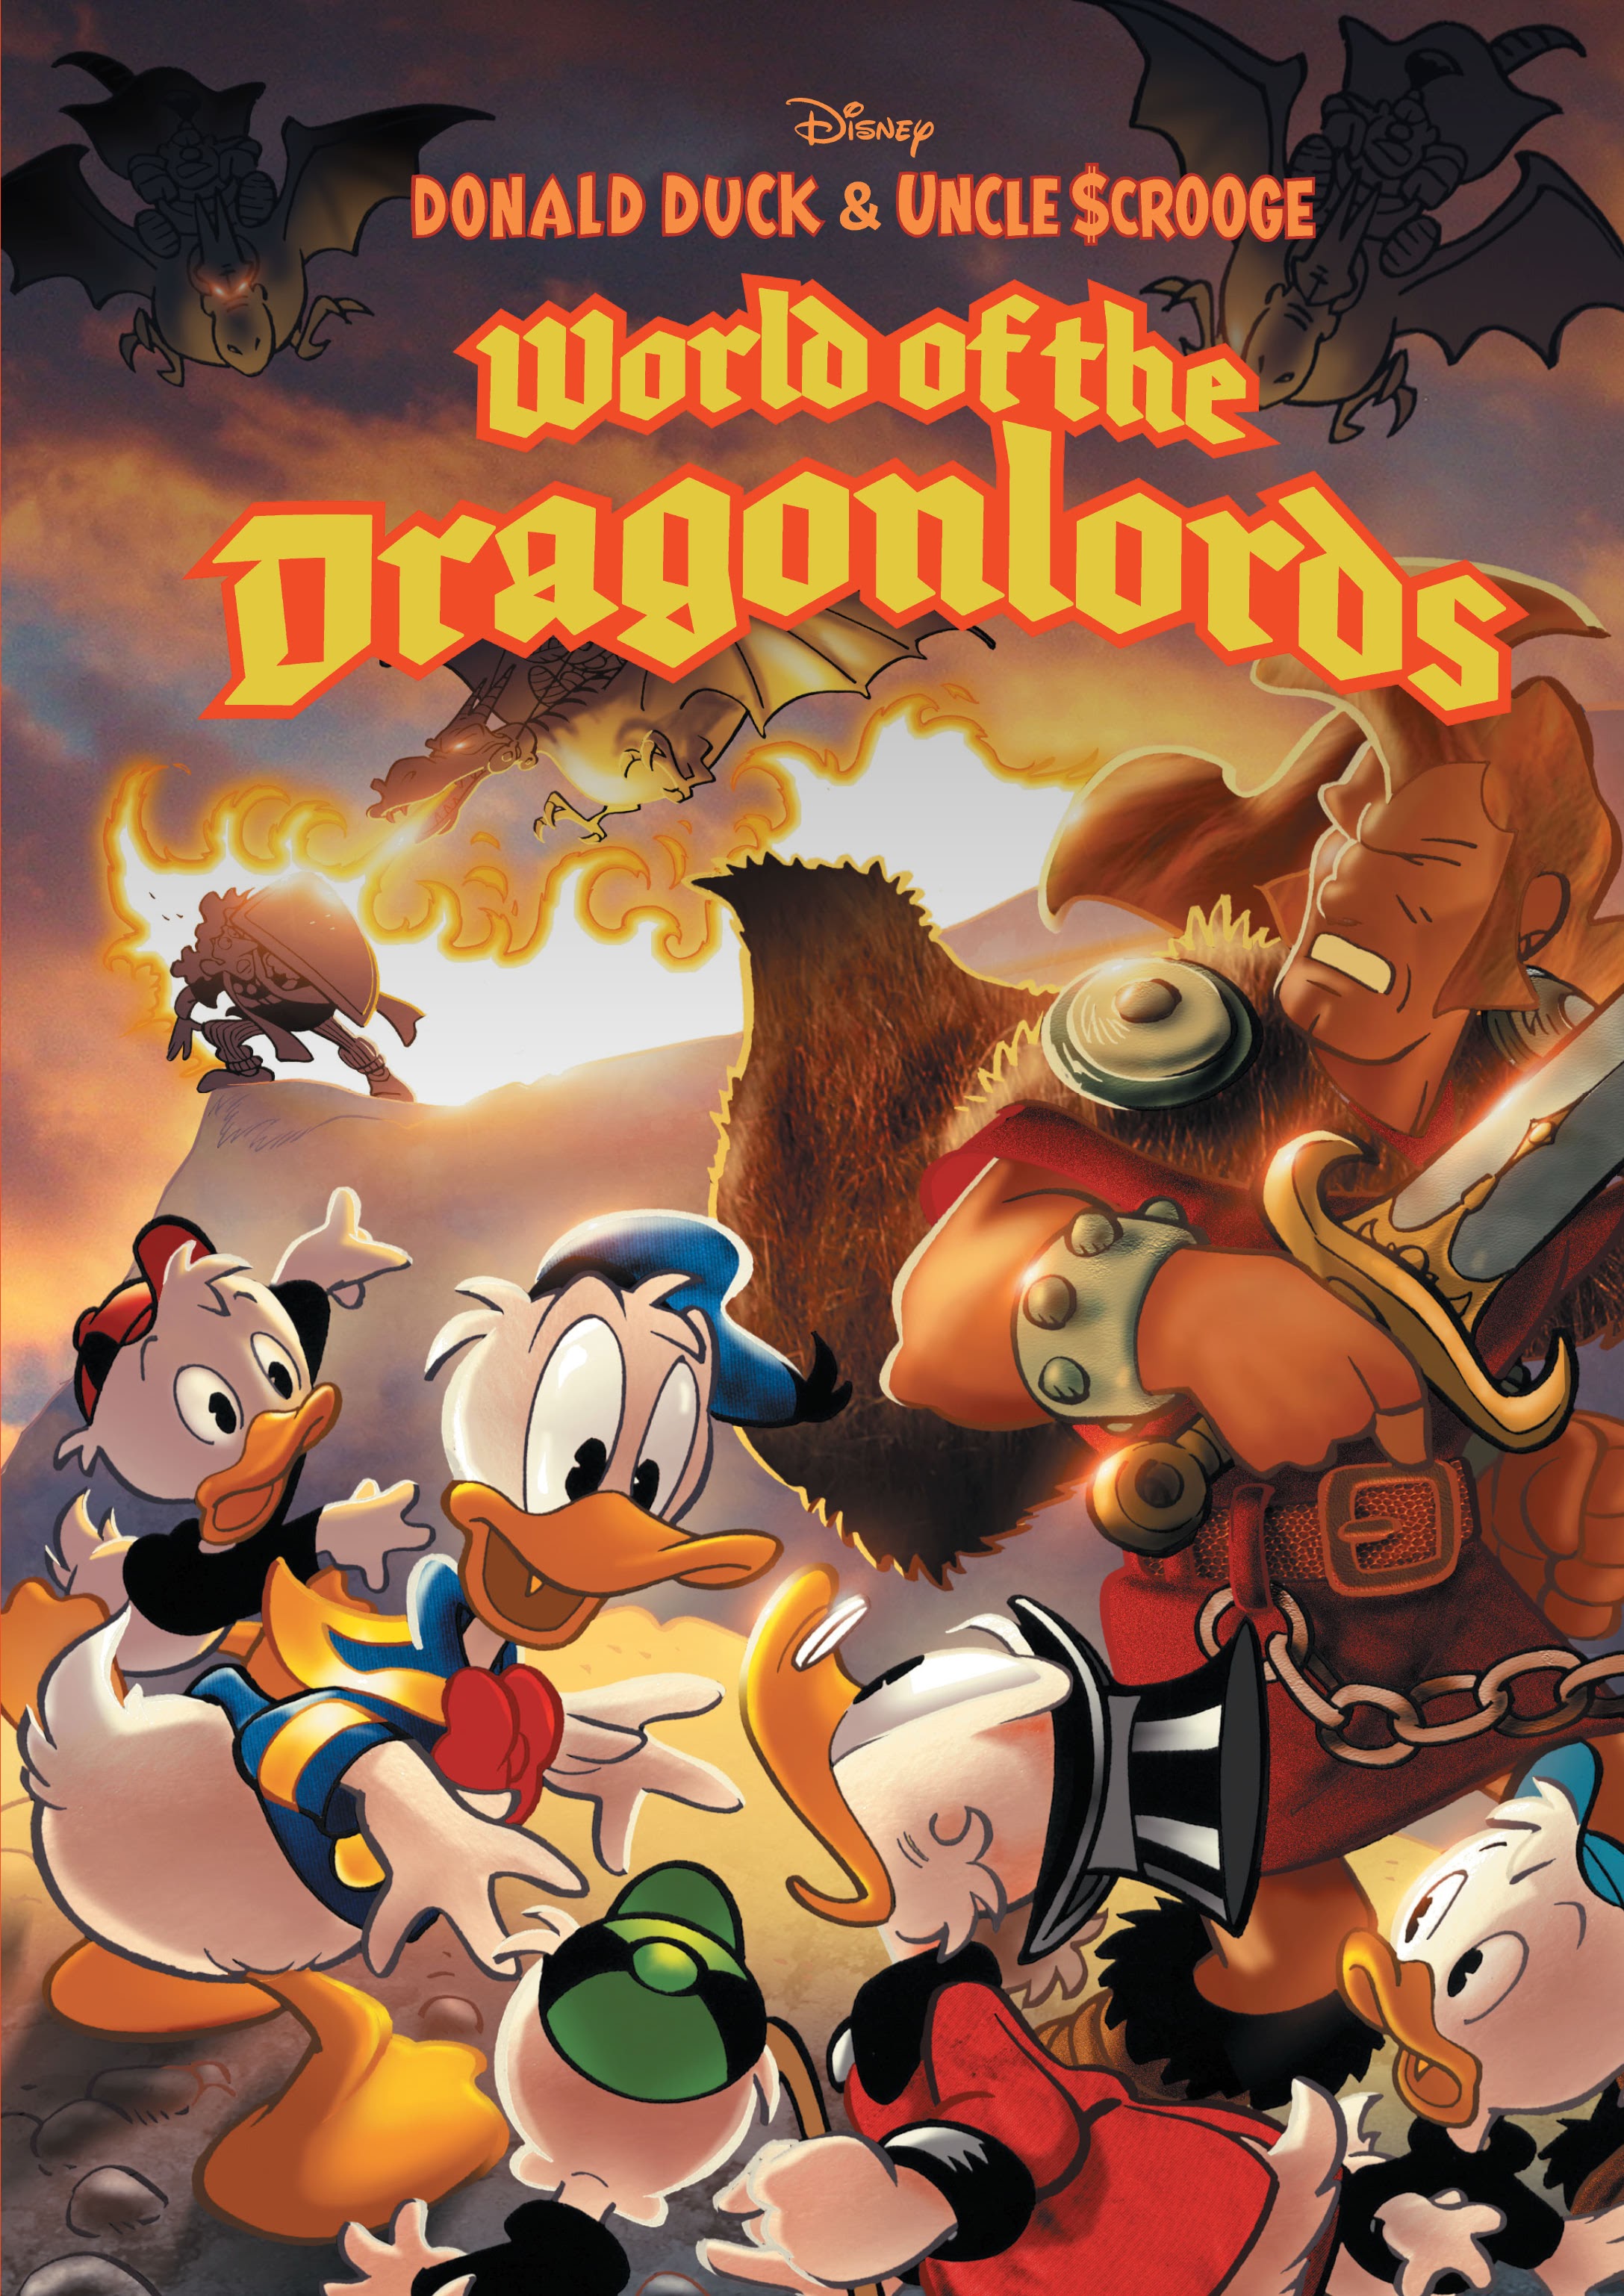 Read online Donald Duck and Uncle Scrooge: World of the Dragonlords comic -  Issue # TPB (Part 1) - 1